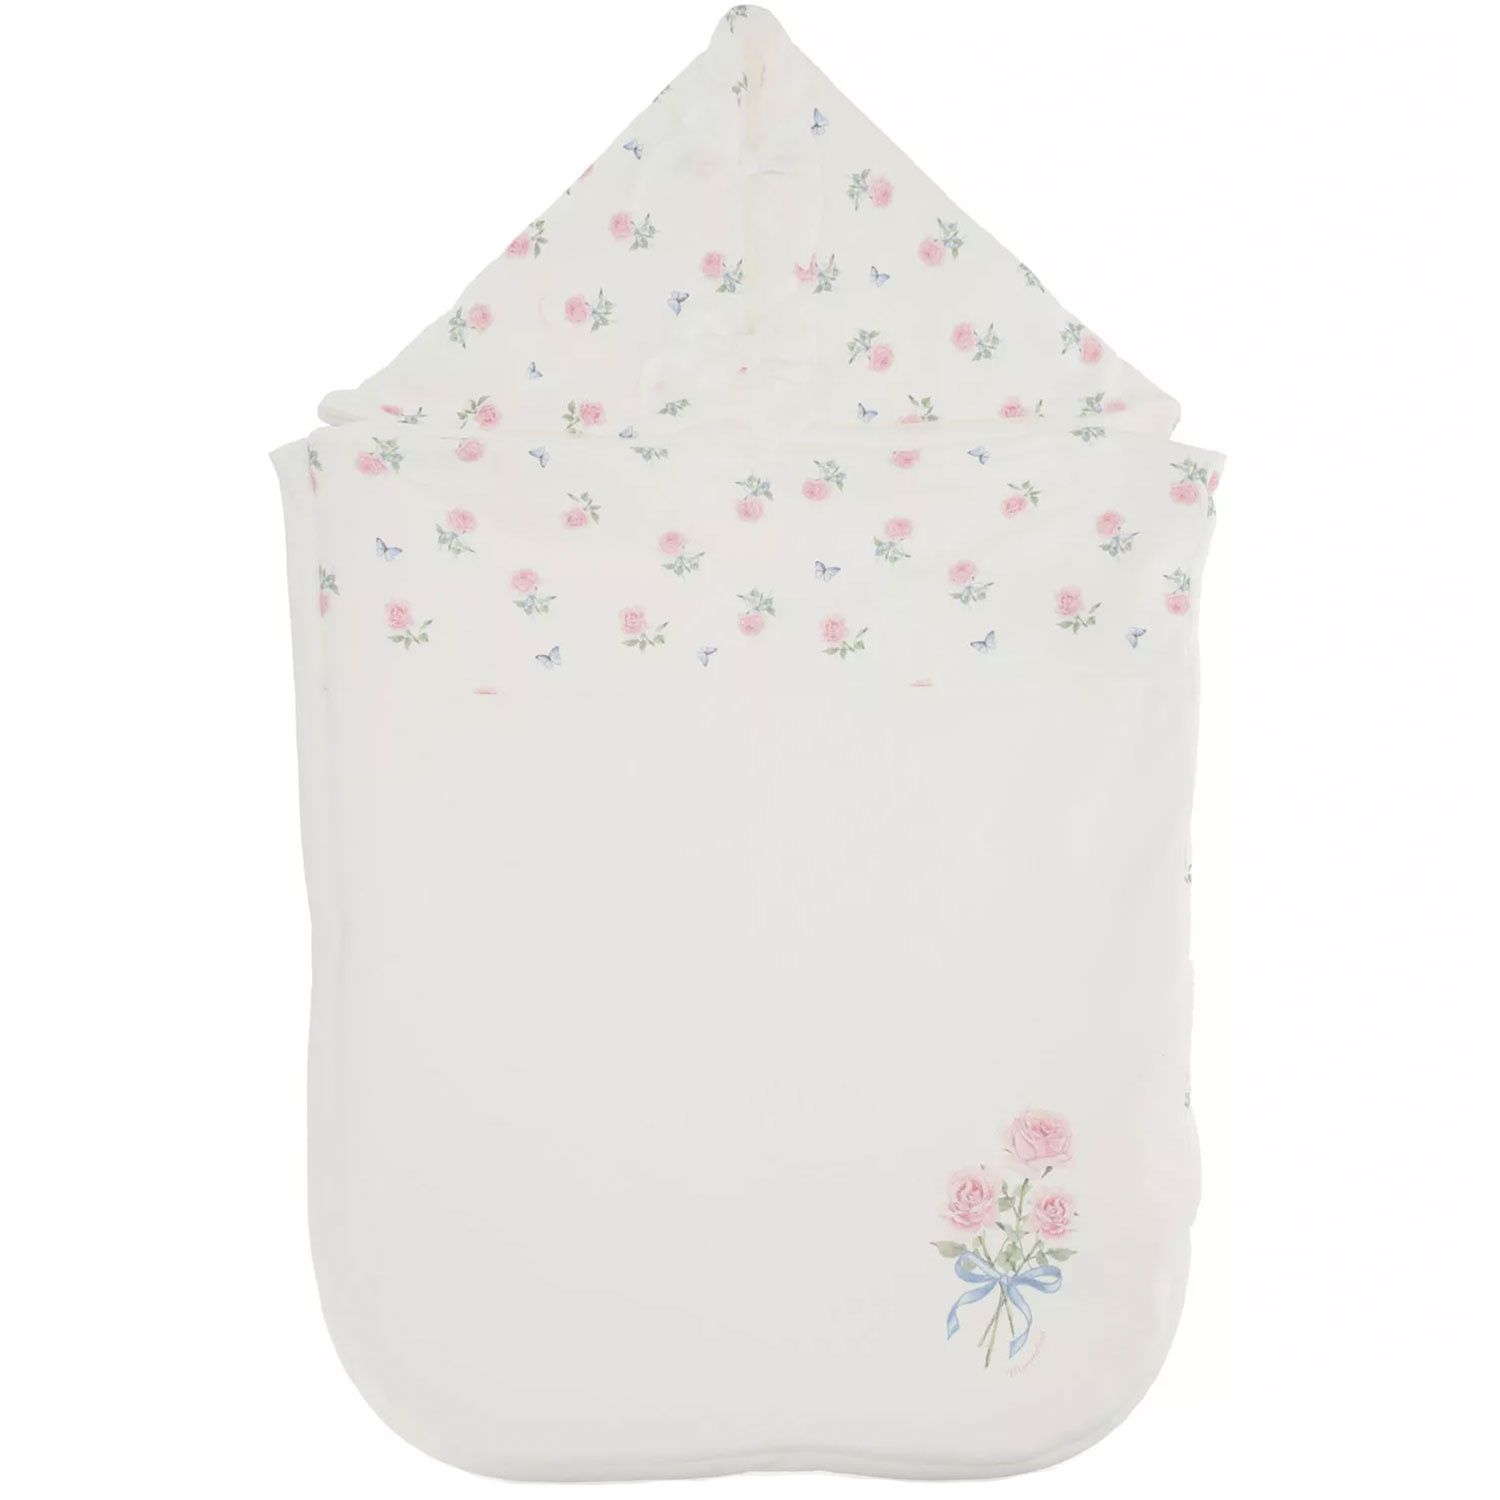 Picture of MonnaLisa 359009 baby accessory off white